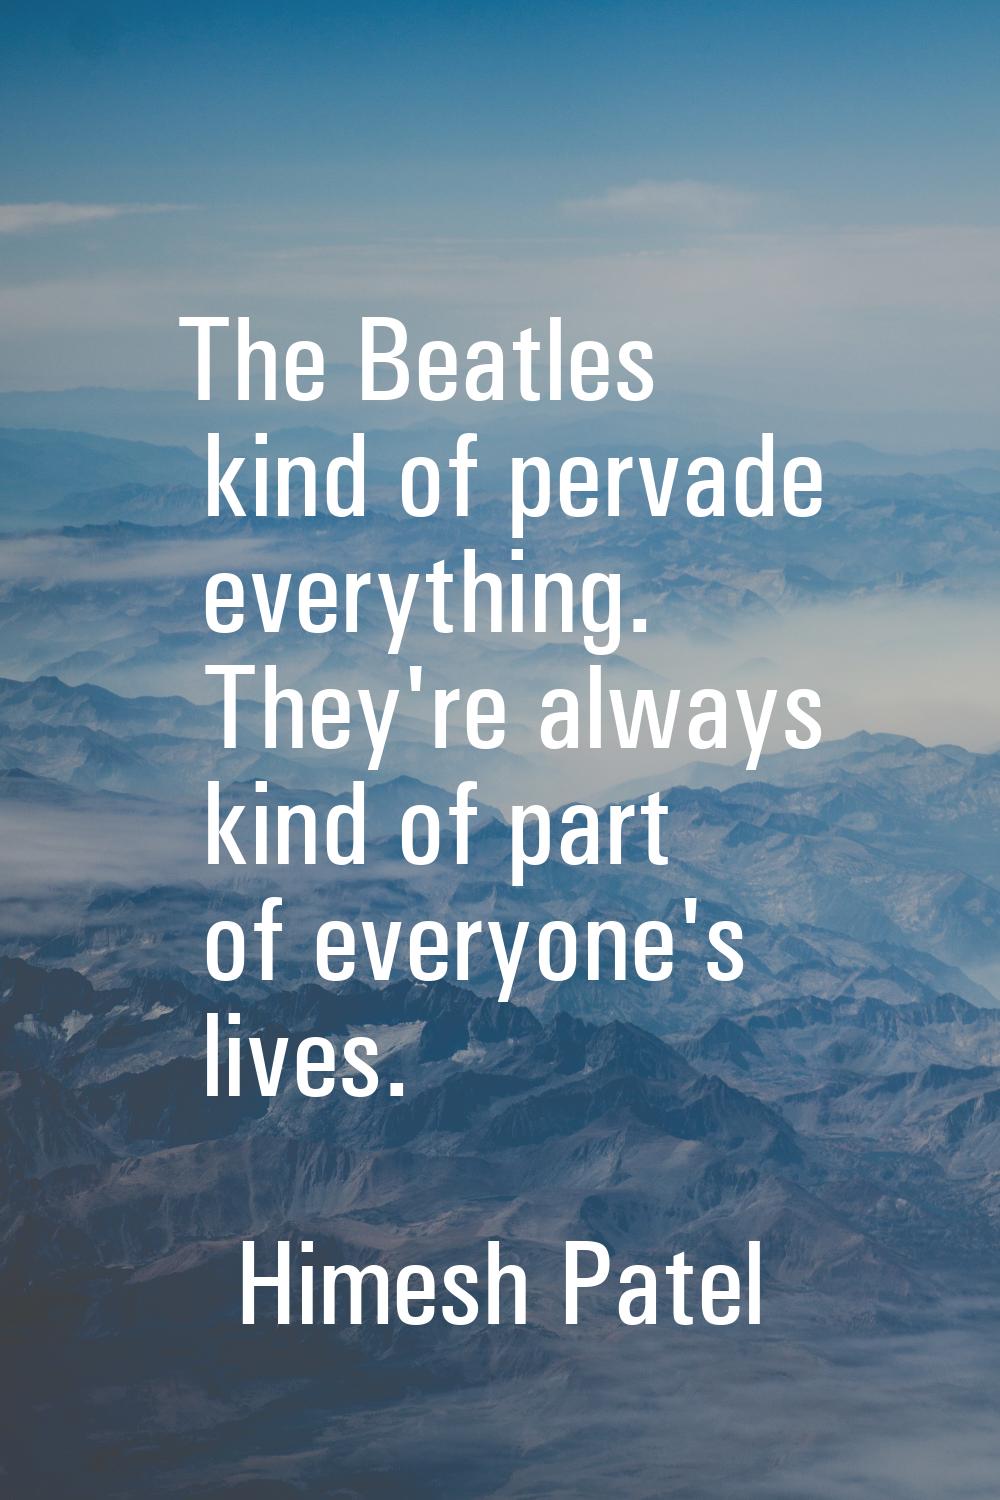 The Beatles kind of pervade everything. They're always kind of part of everyone's lives.